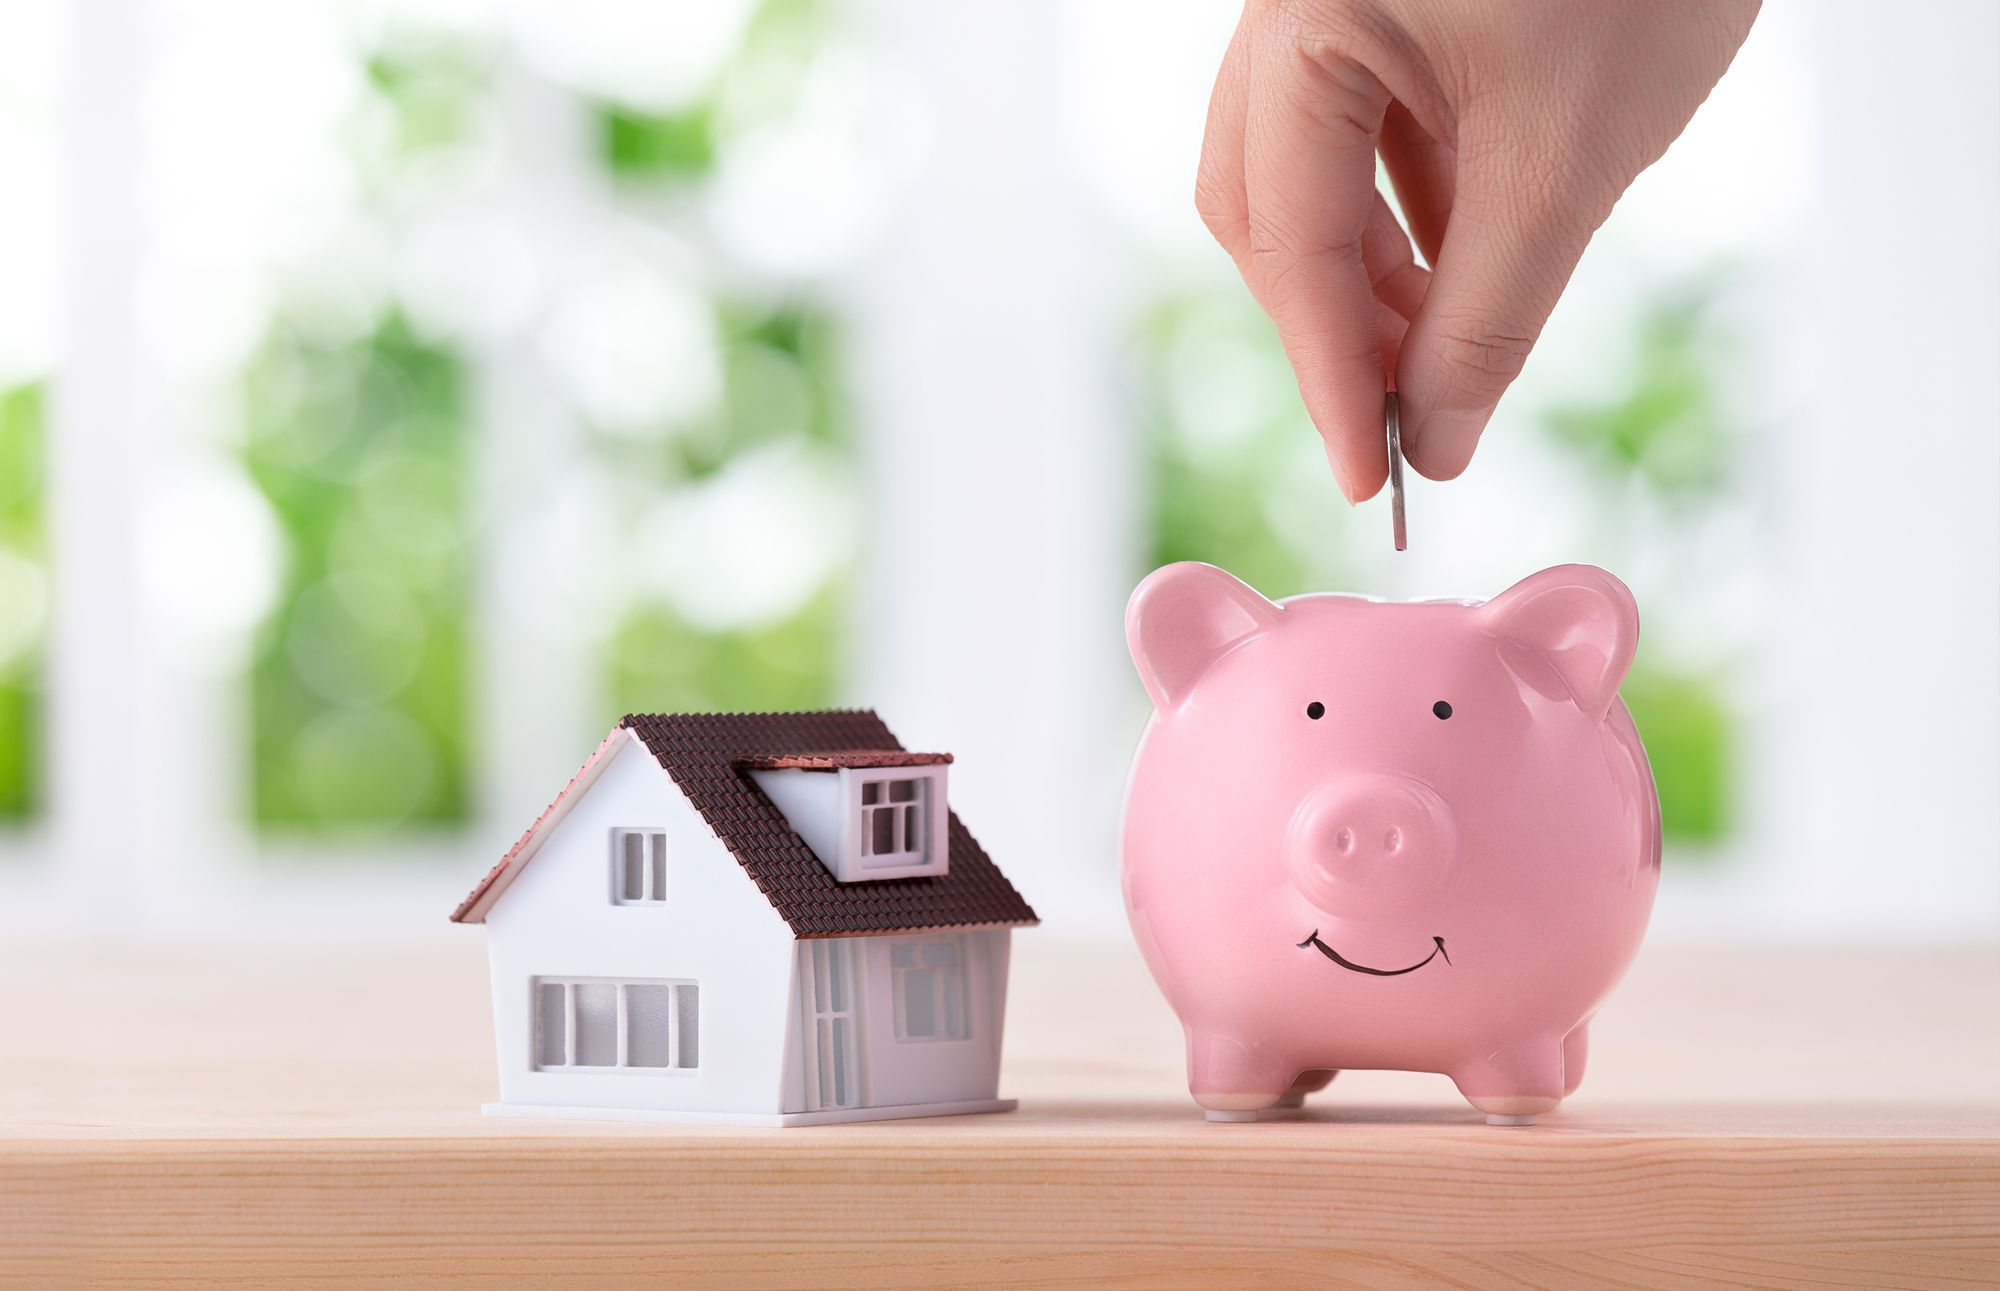 What Is the #1 Financial Benefit Of Buying A Home?